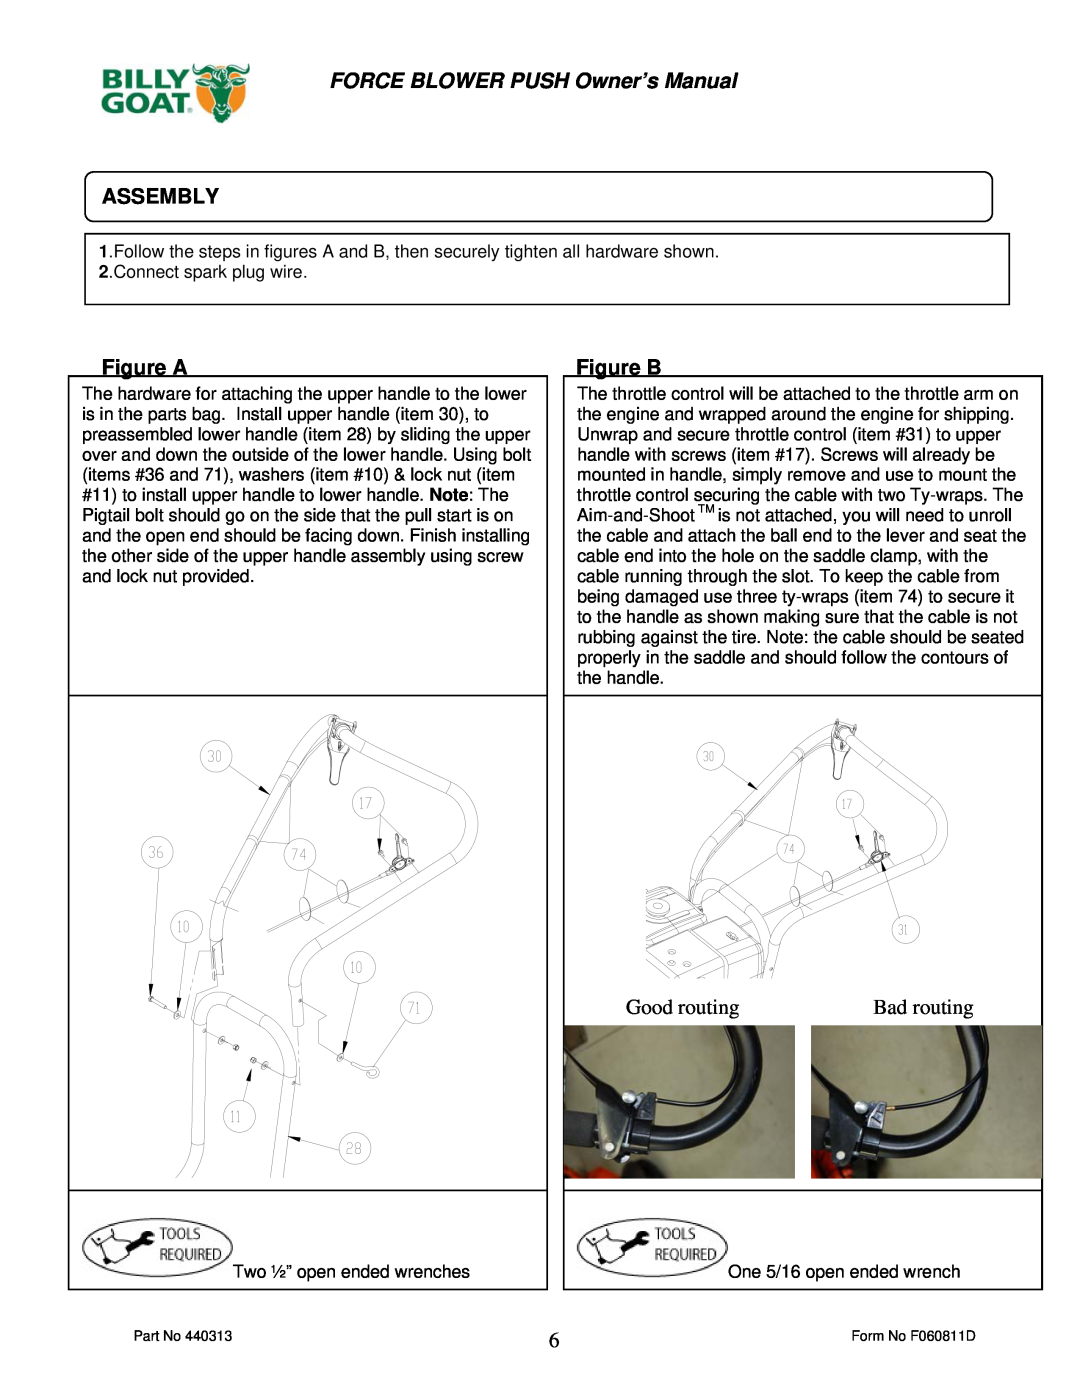 Billy Goat F902H, F902S, F1302H, F1802V owner manual Assembly, Figure A, Figure B, Good routing, Bad routing 